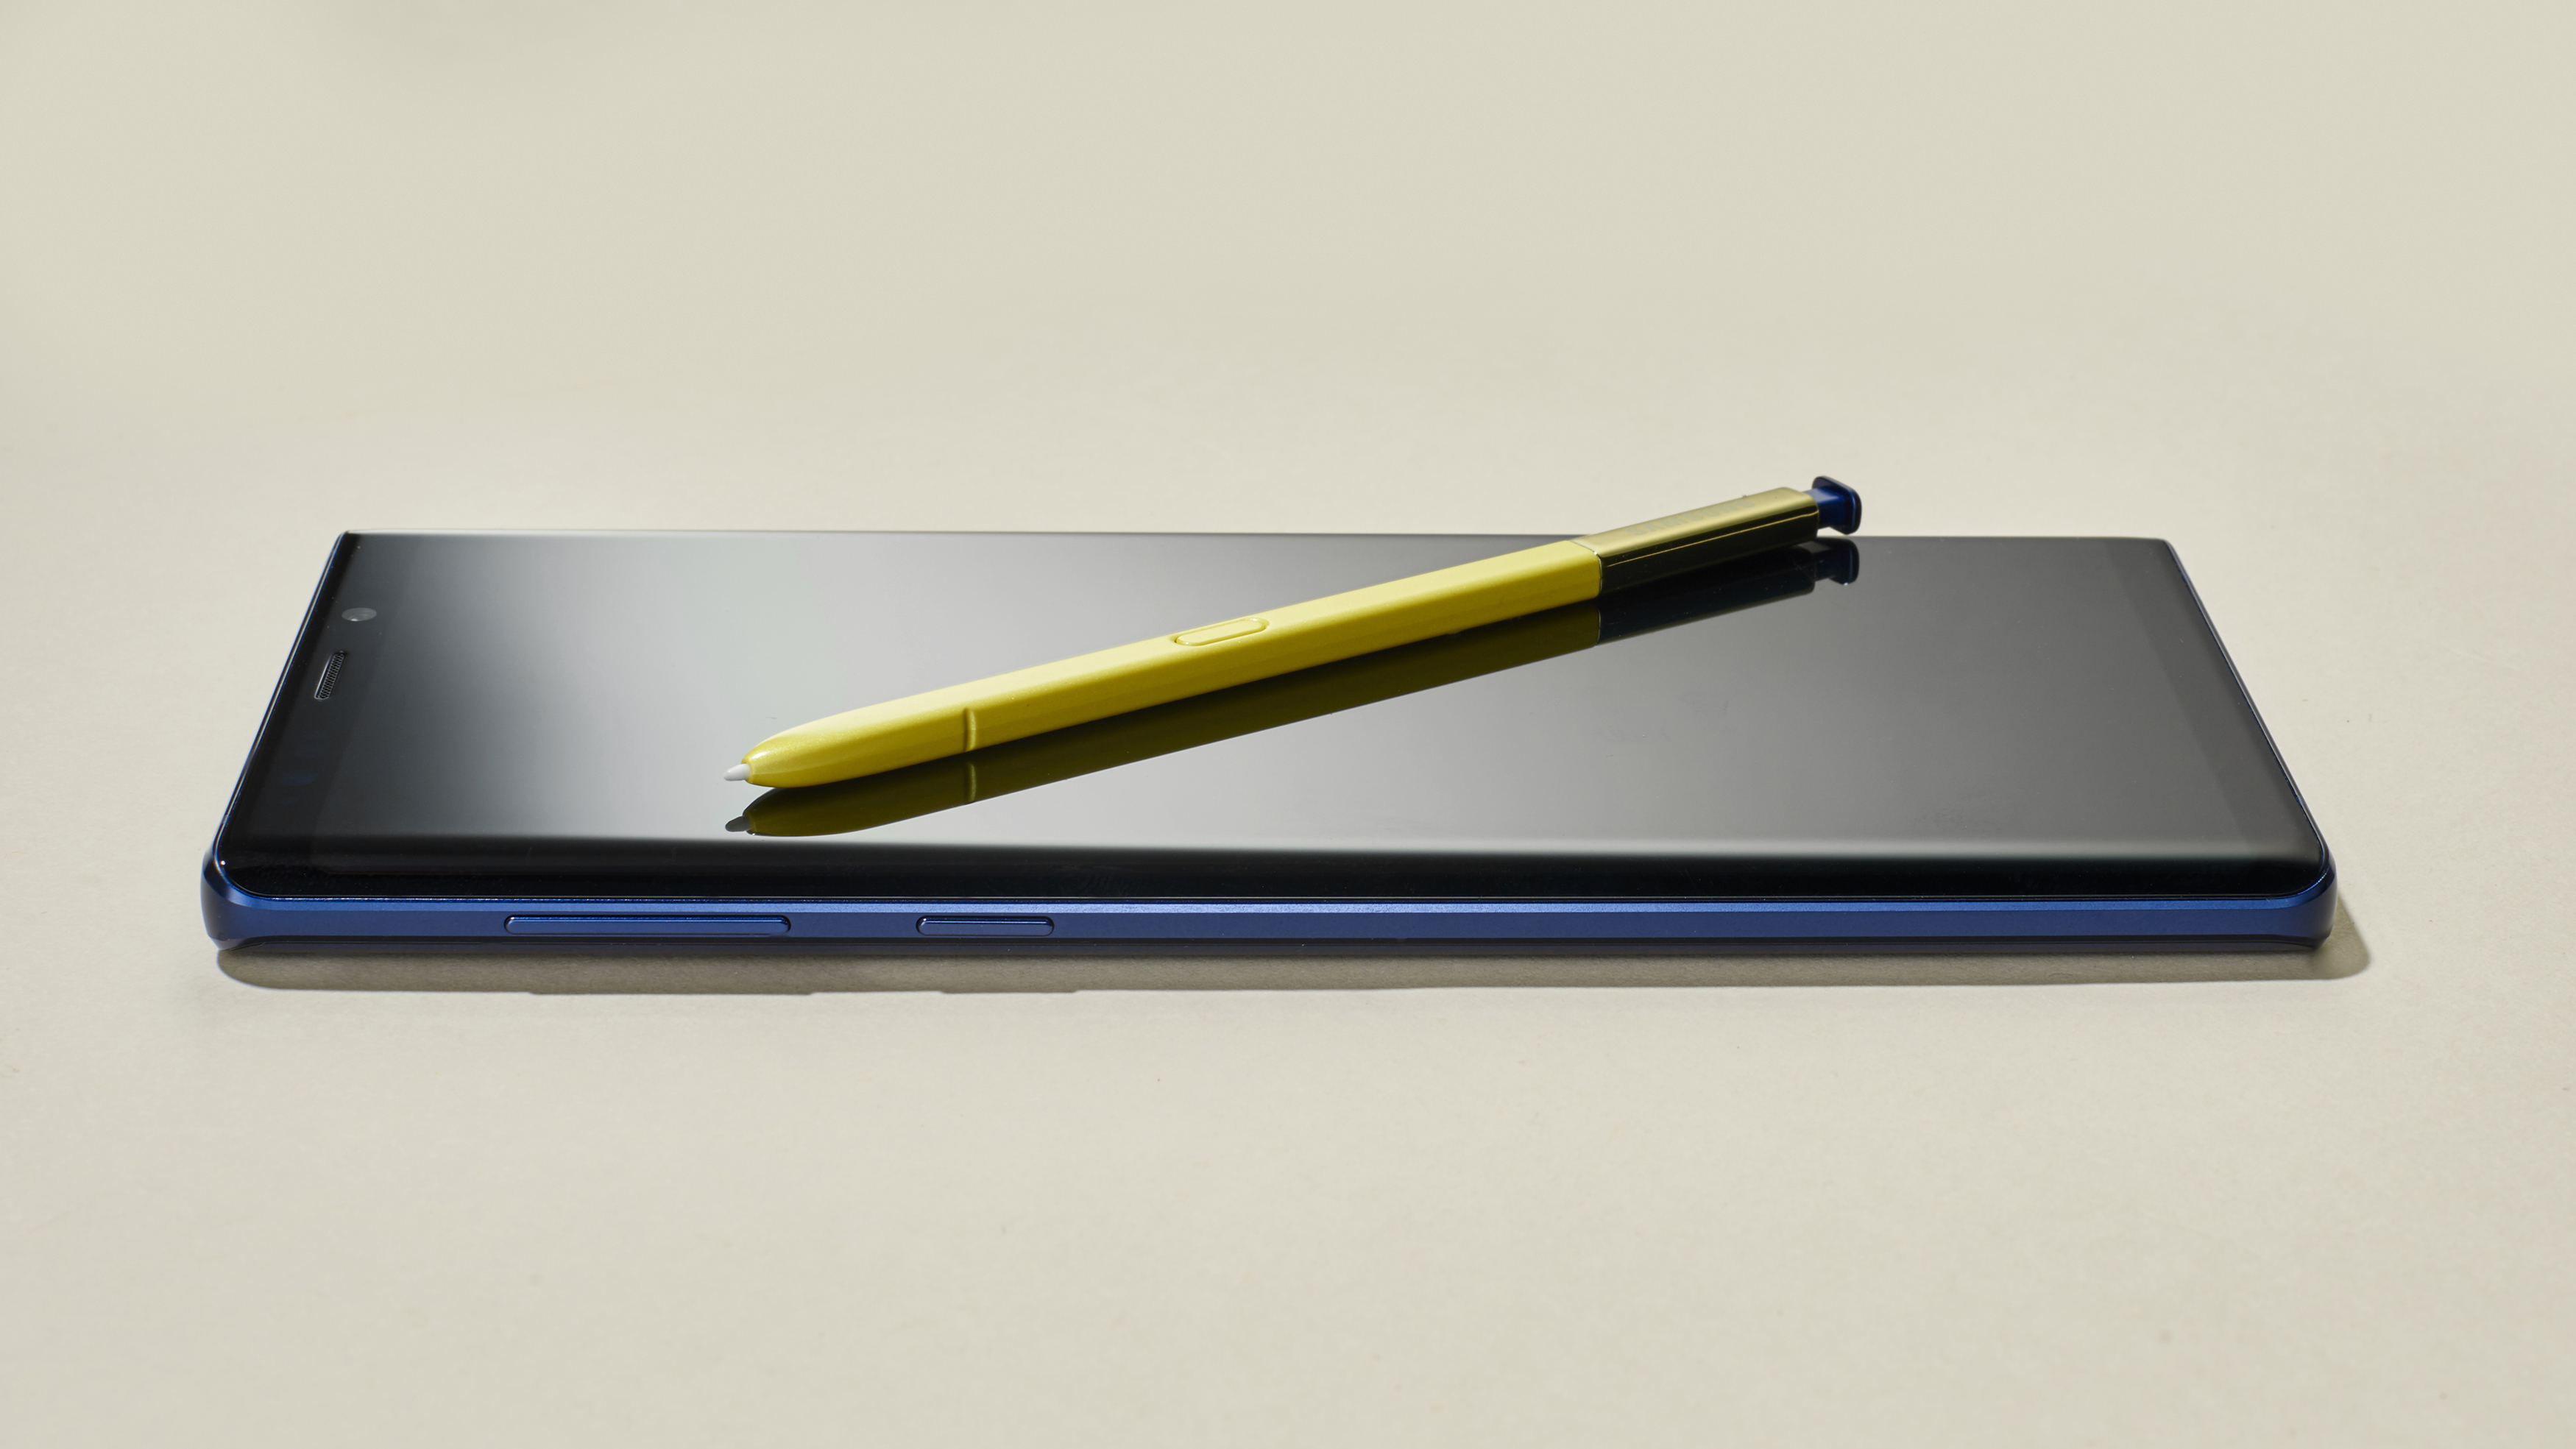 Samsung Galaxy Note 9 review